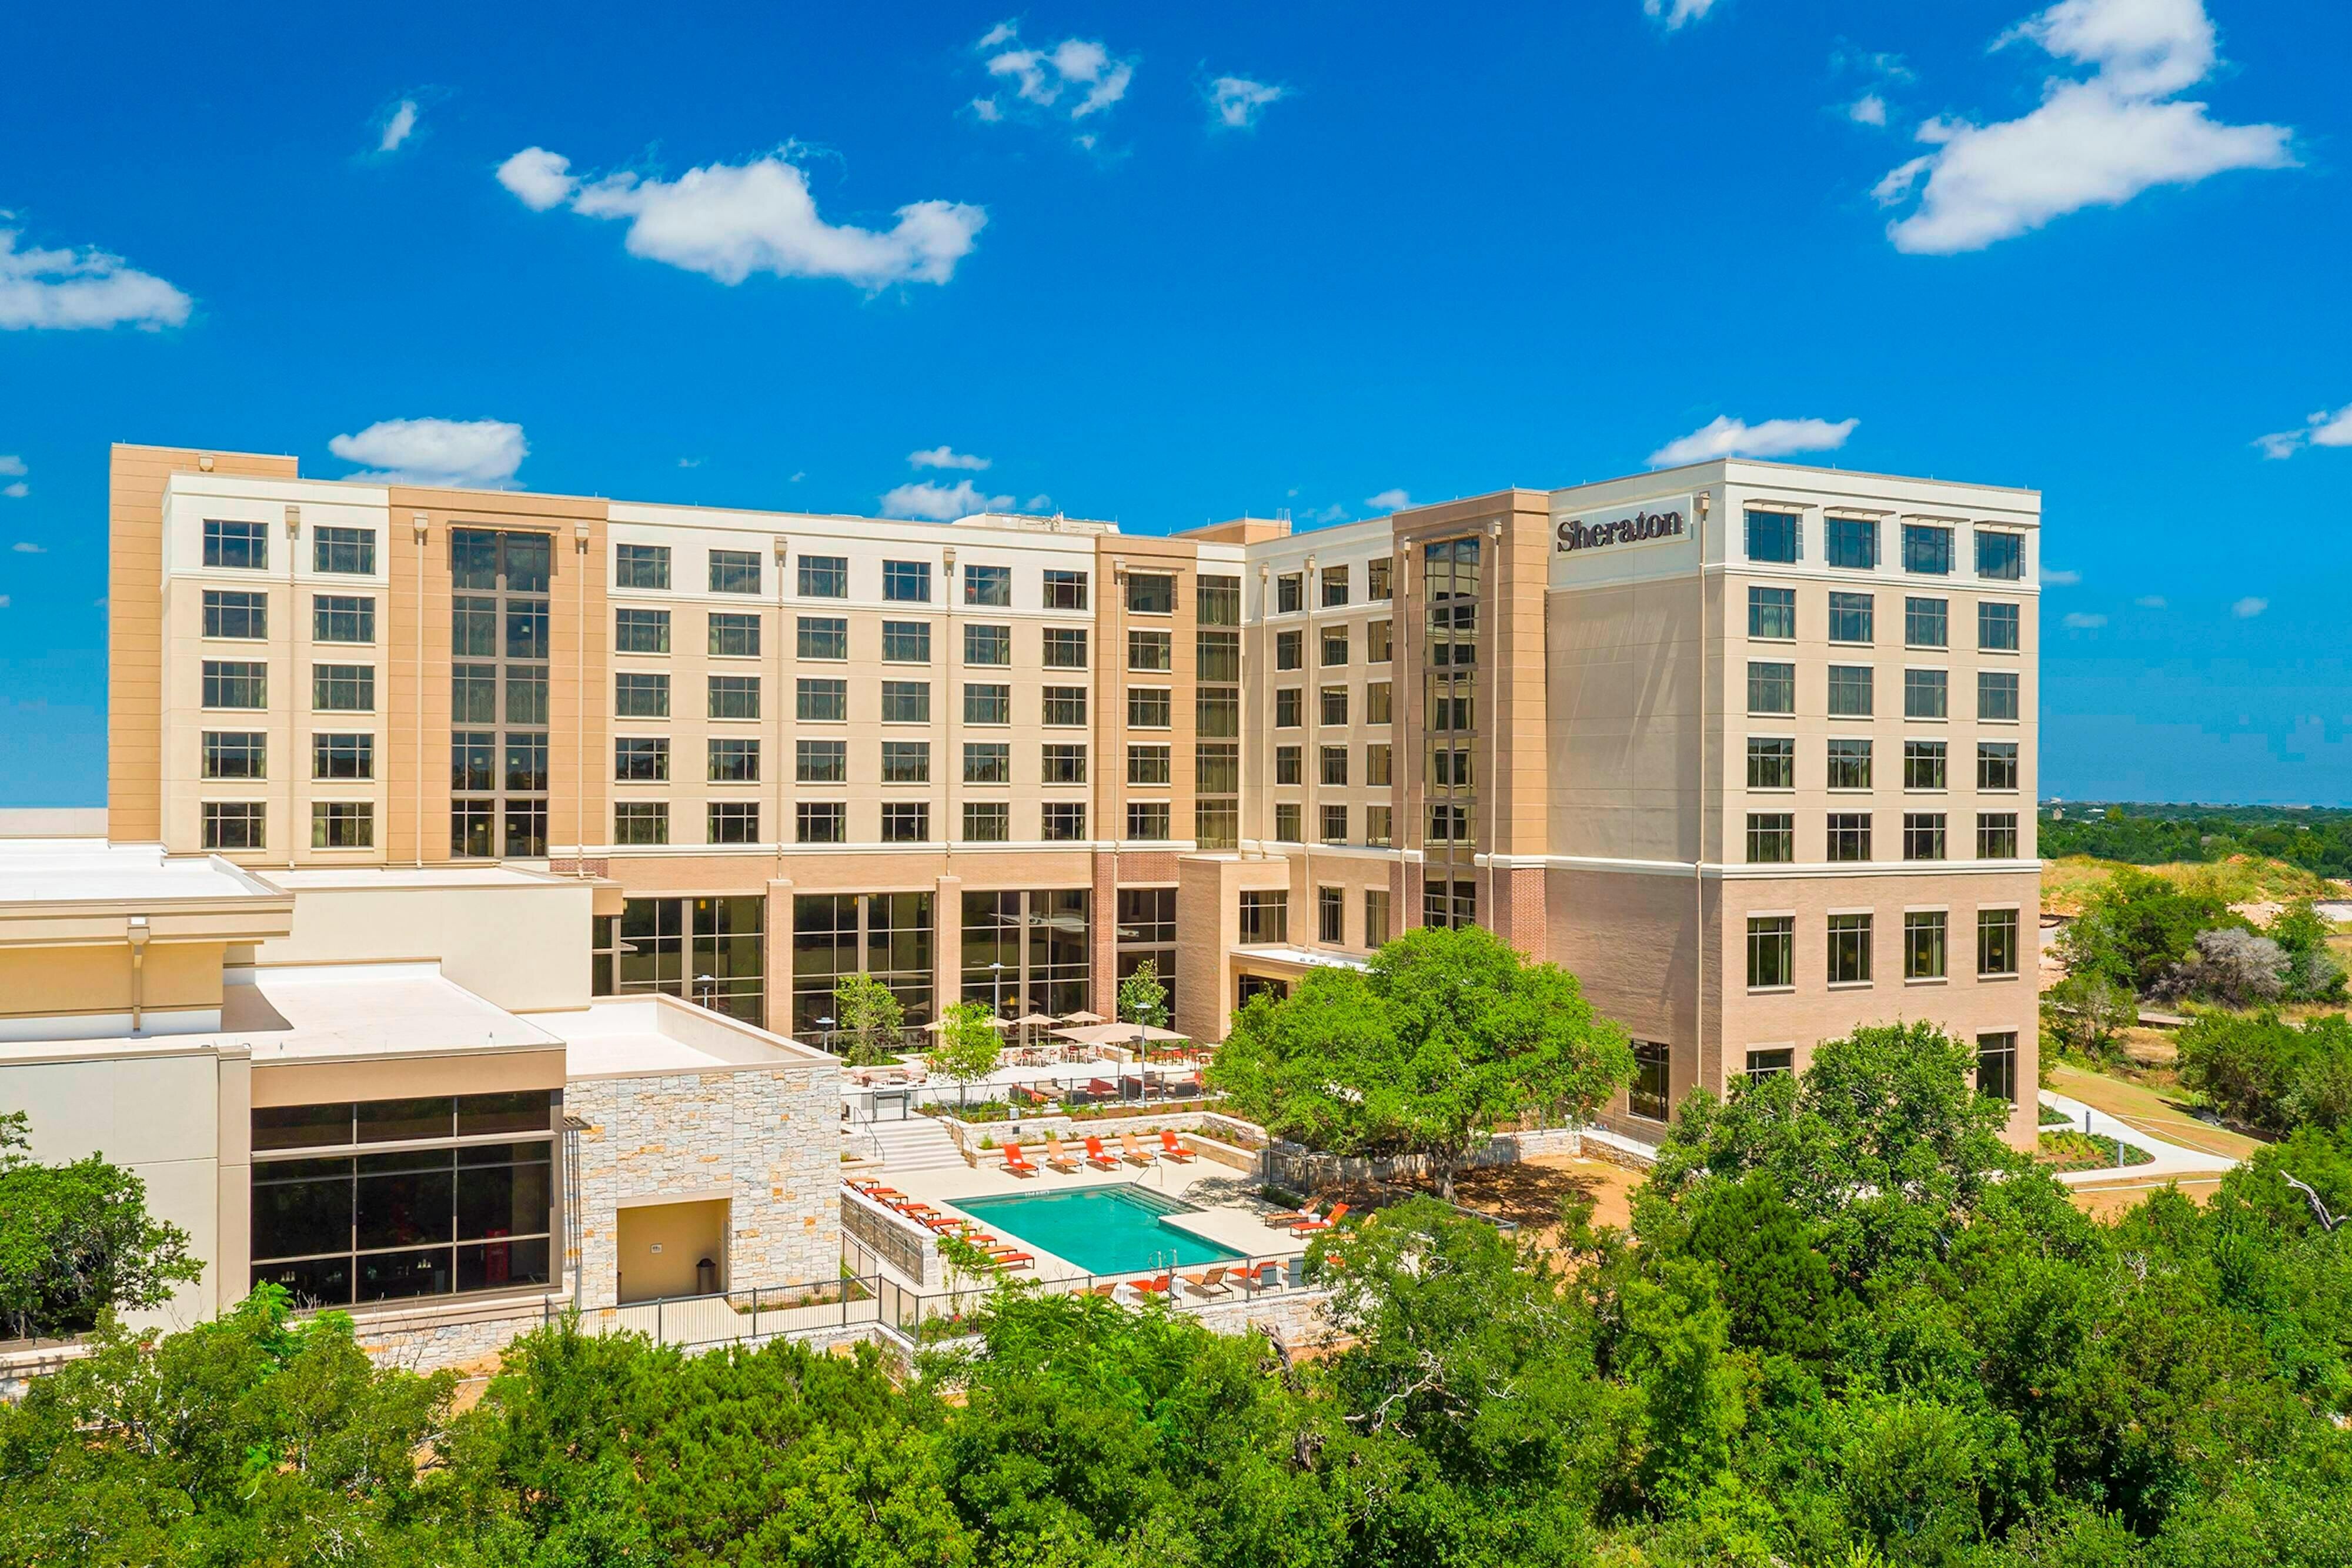 Photo of Sheraton Georgetown Texas Hotel & Conference Center, Georgetown, TX